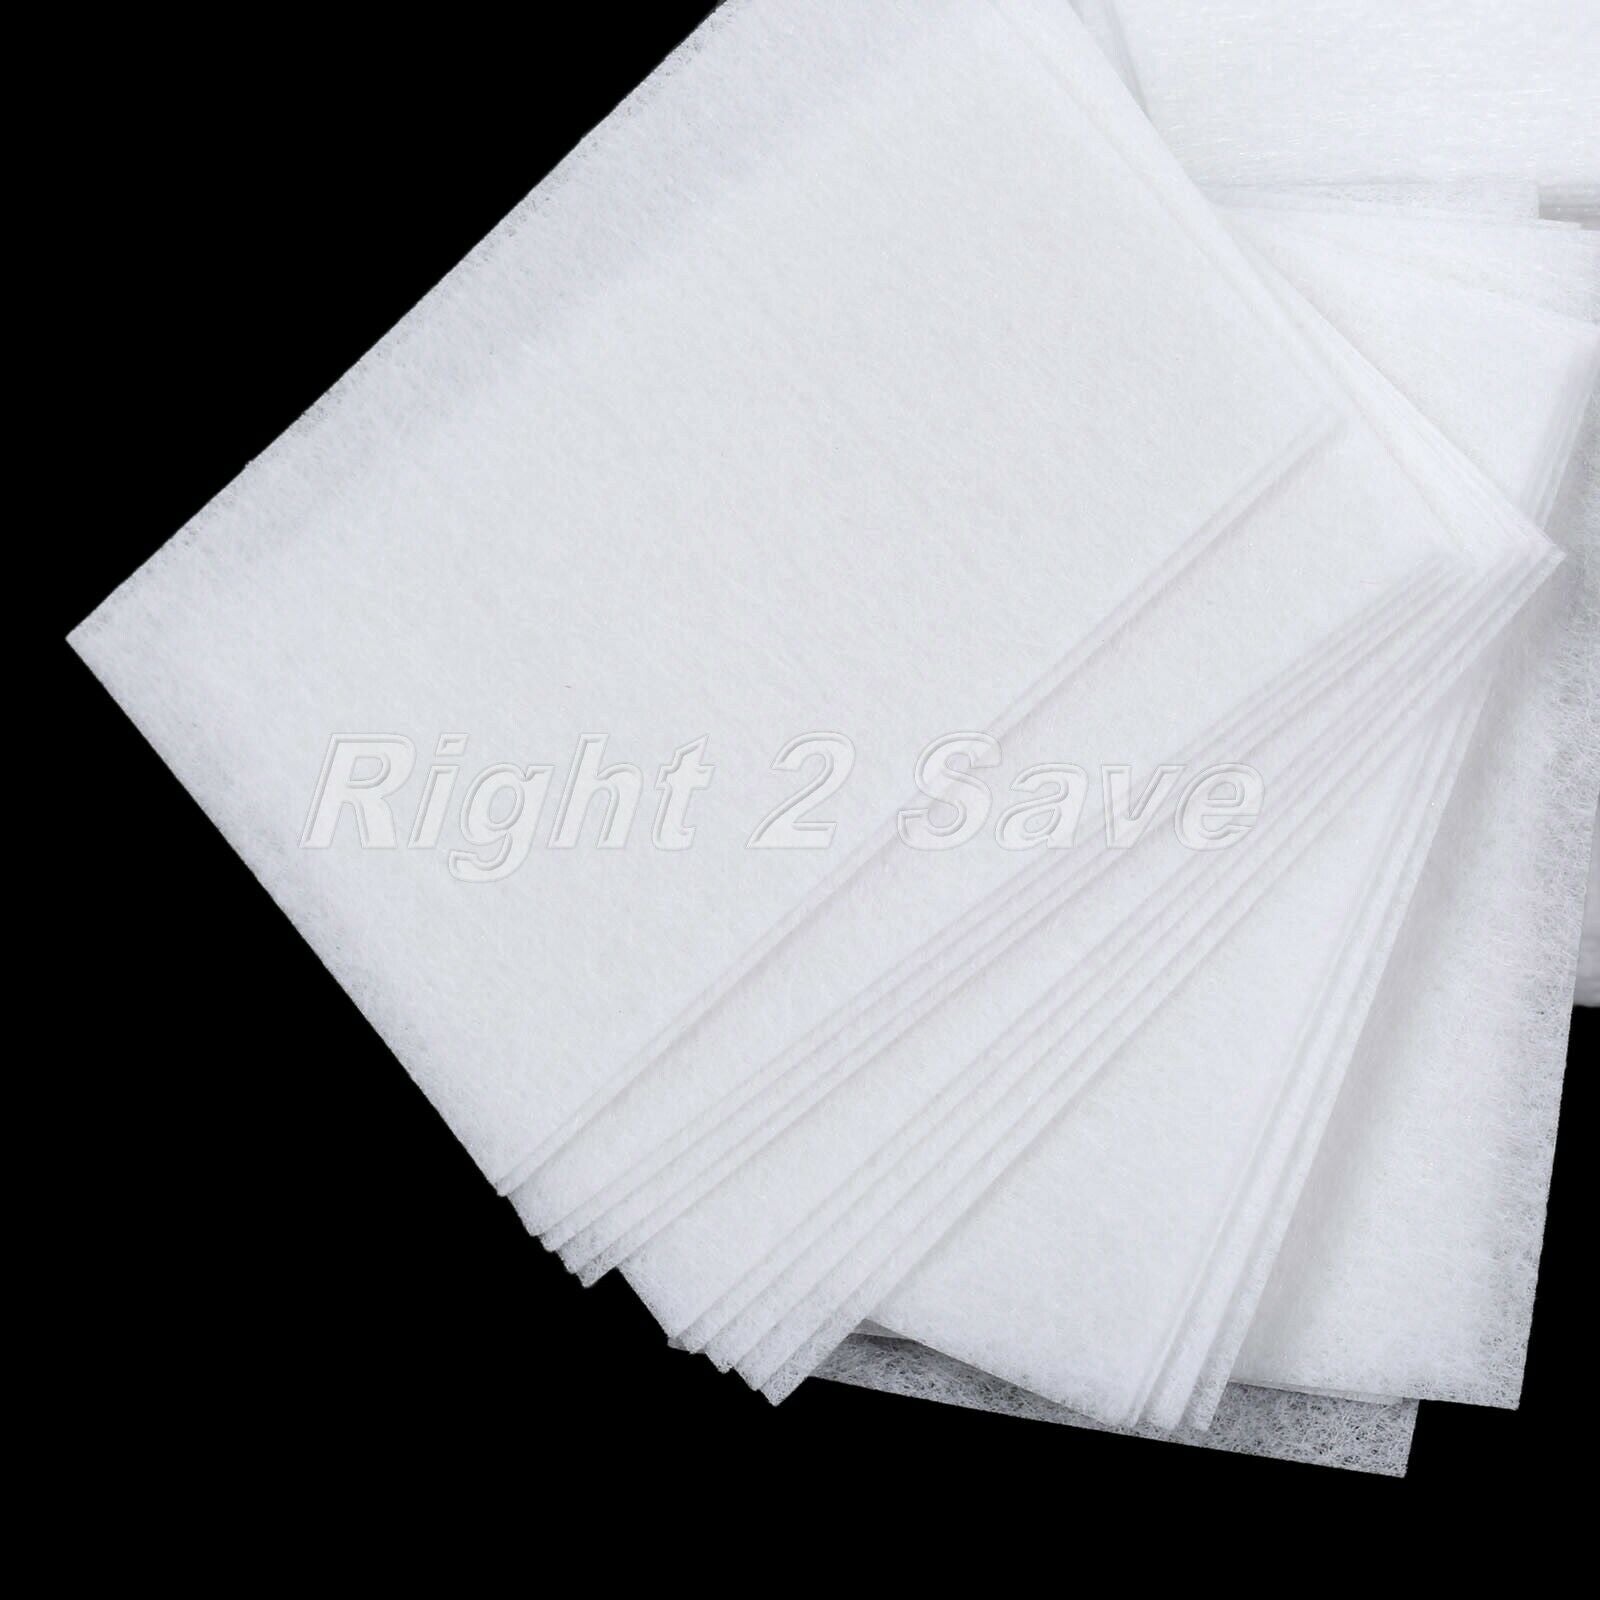 900Pcs White Nail Wipes Manicure Nail Art Polish Remover Cleaner Wipe Cotton Pad